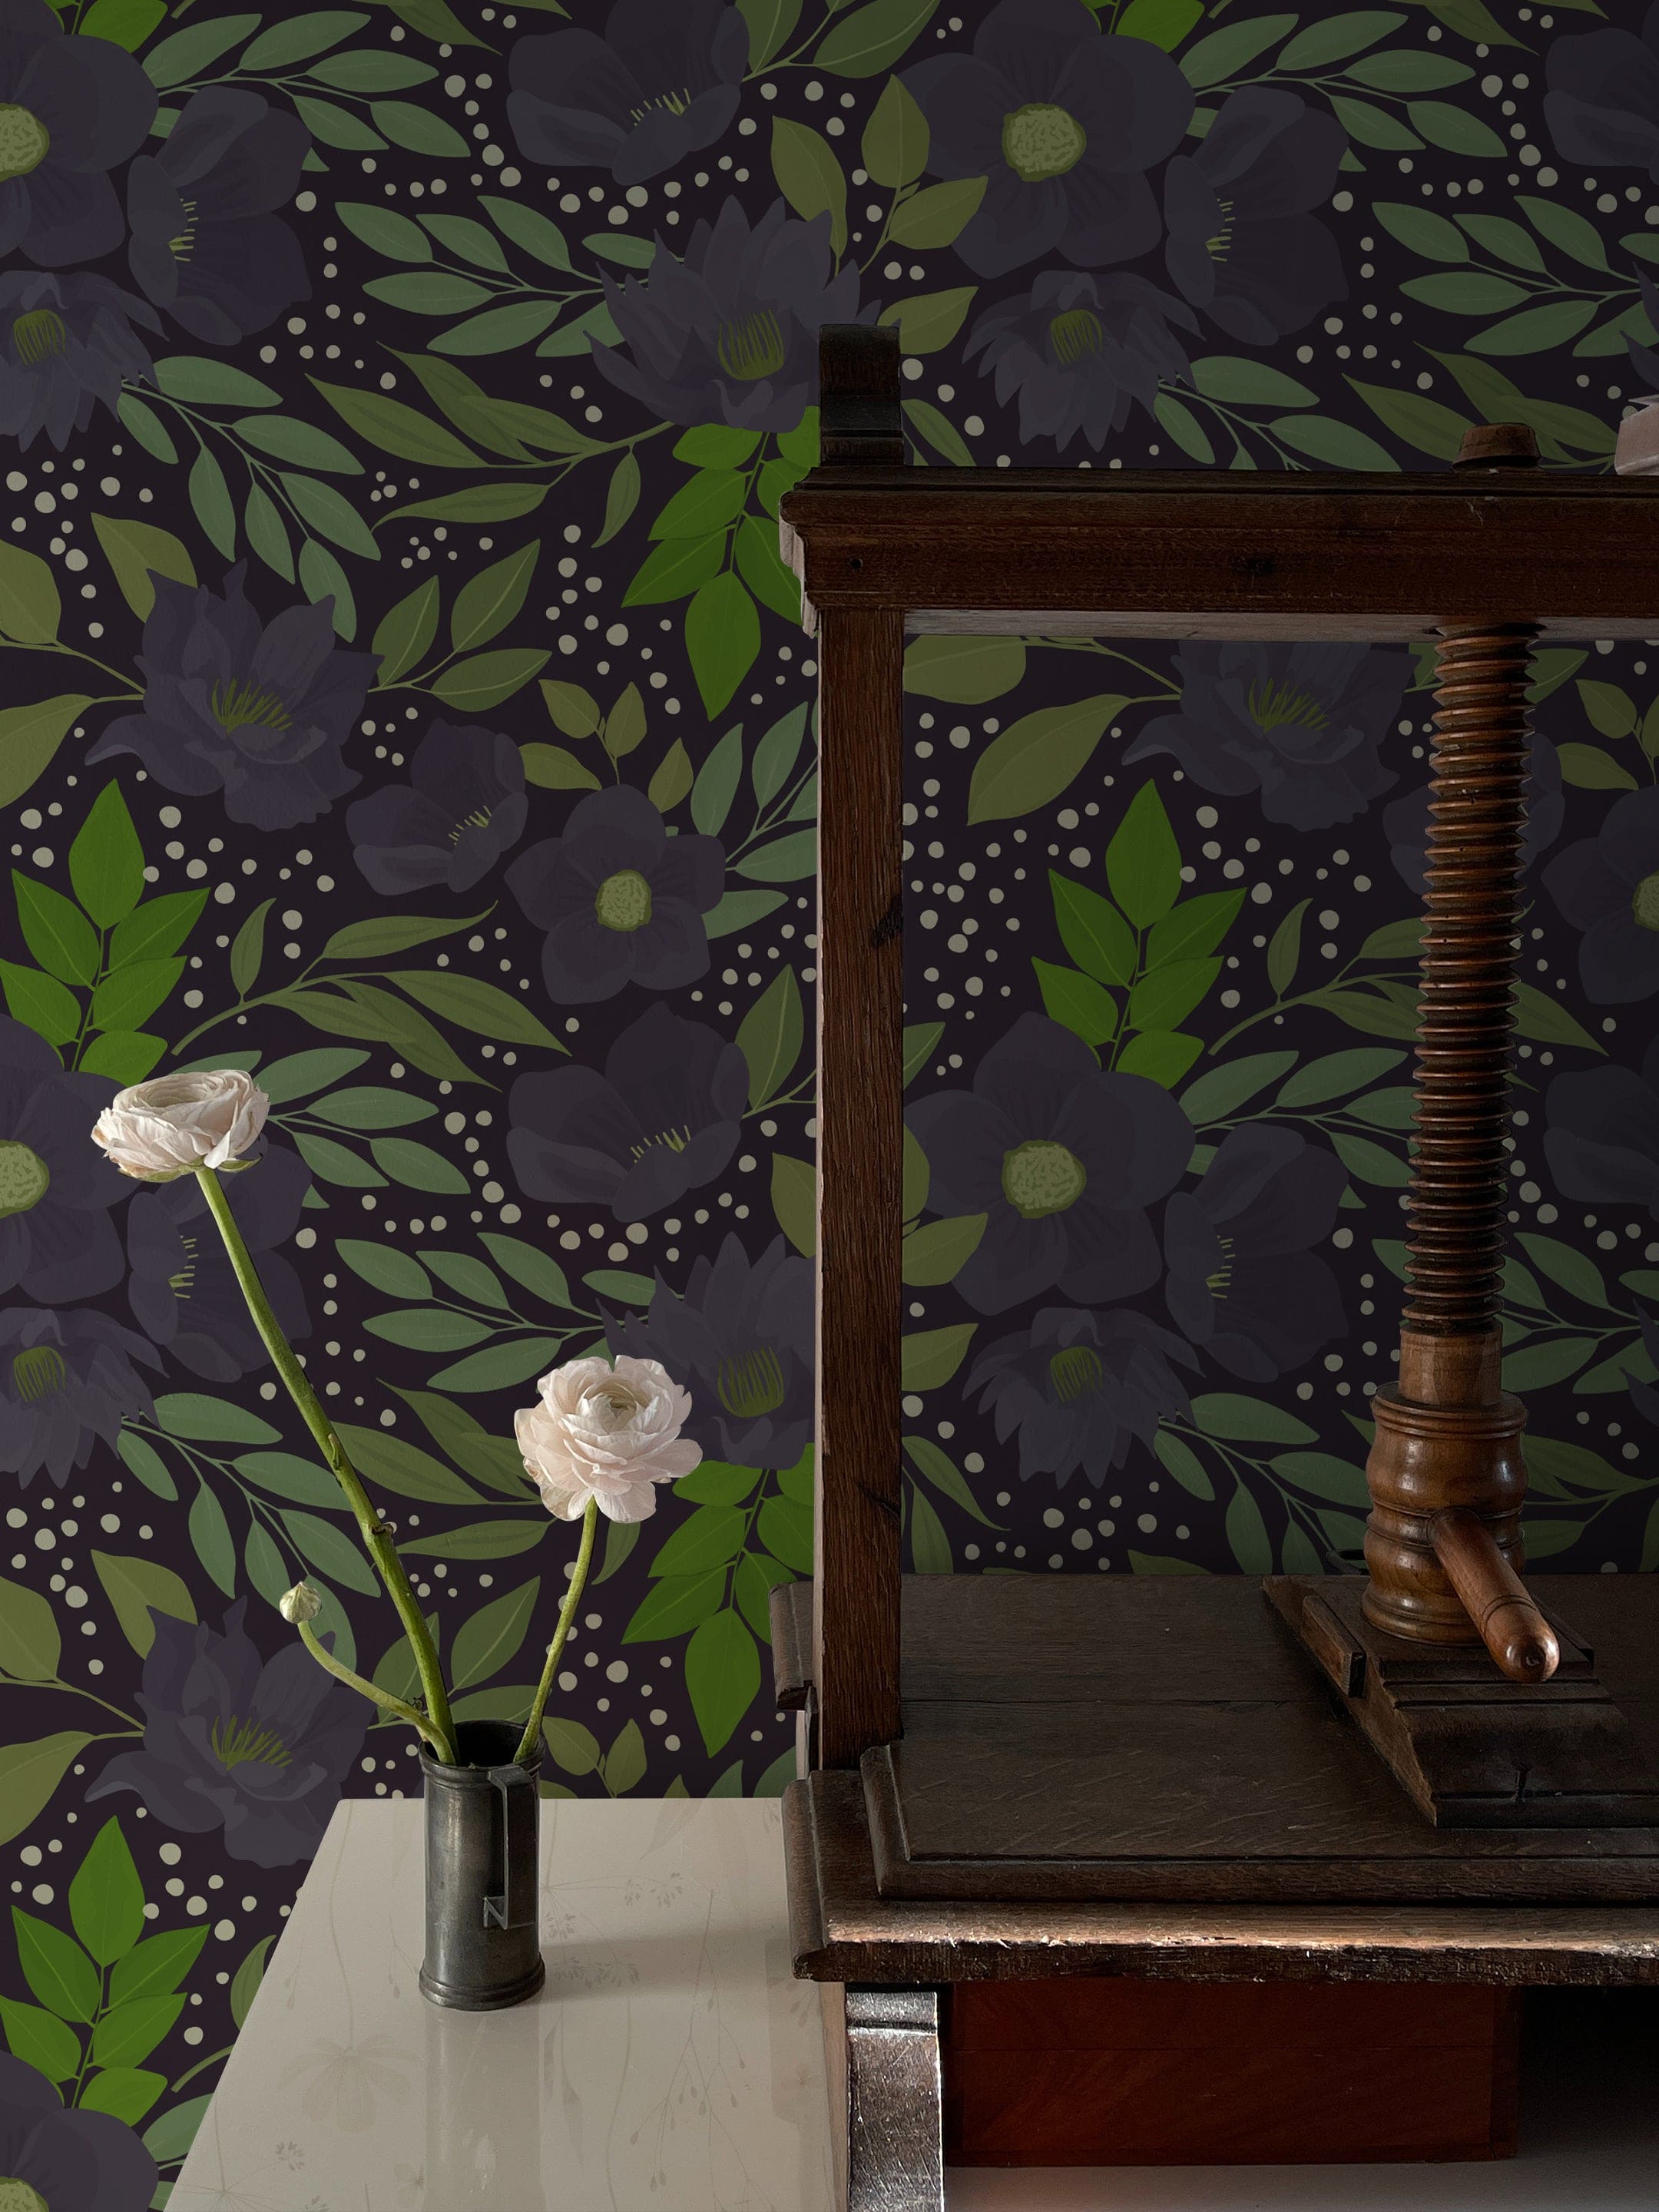 A stylish interior space with the Martinique Floral Wallpaper, showcasing a dark and moody floral pattern with large purple blooms and vibrant green foliage. A rustic wooden table holds a single white rose in a small vase, contrasting elegantly against the detailed wallpaper.